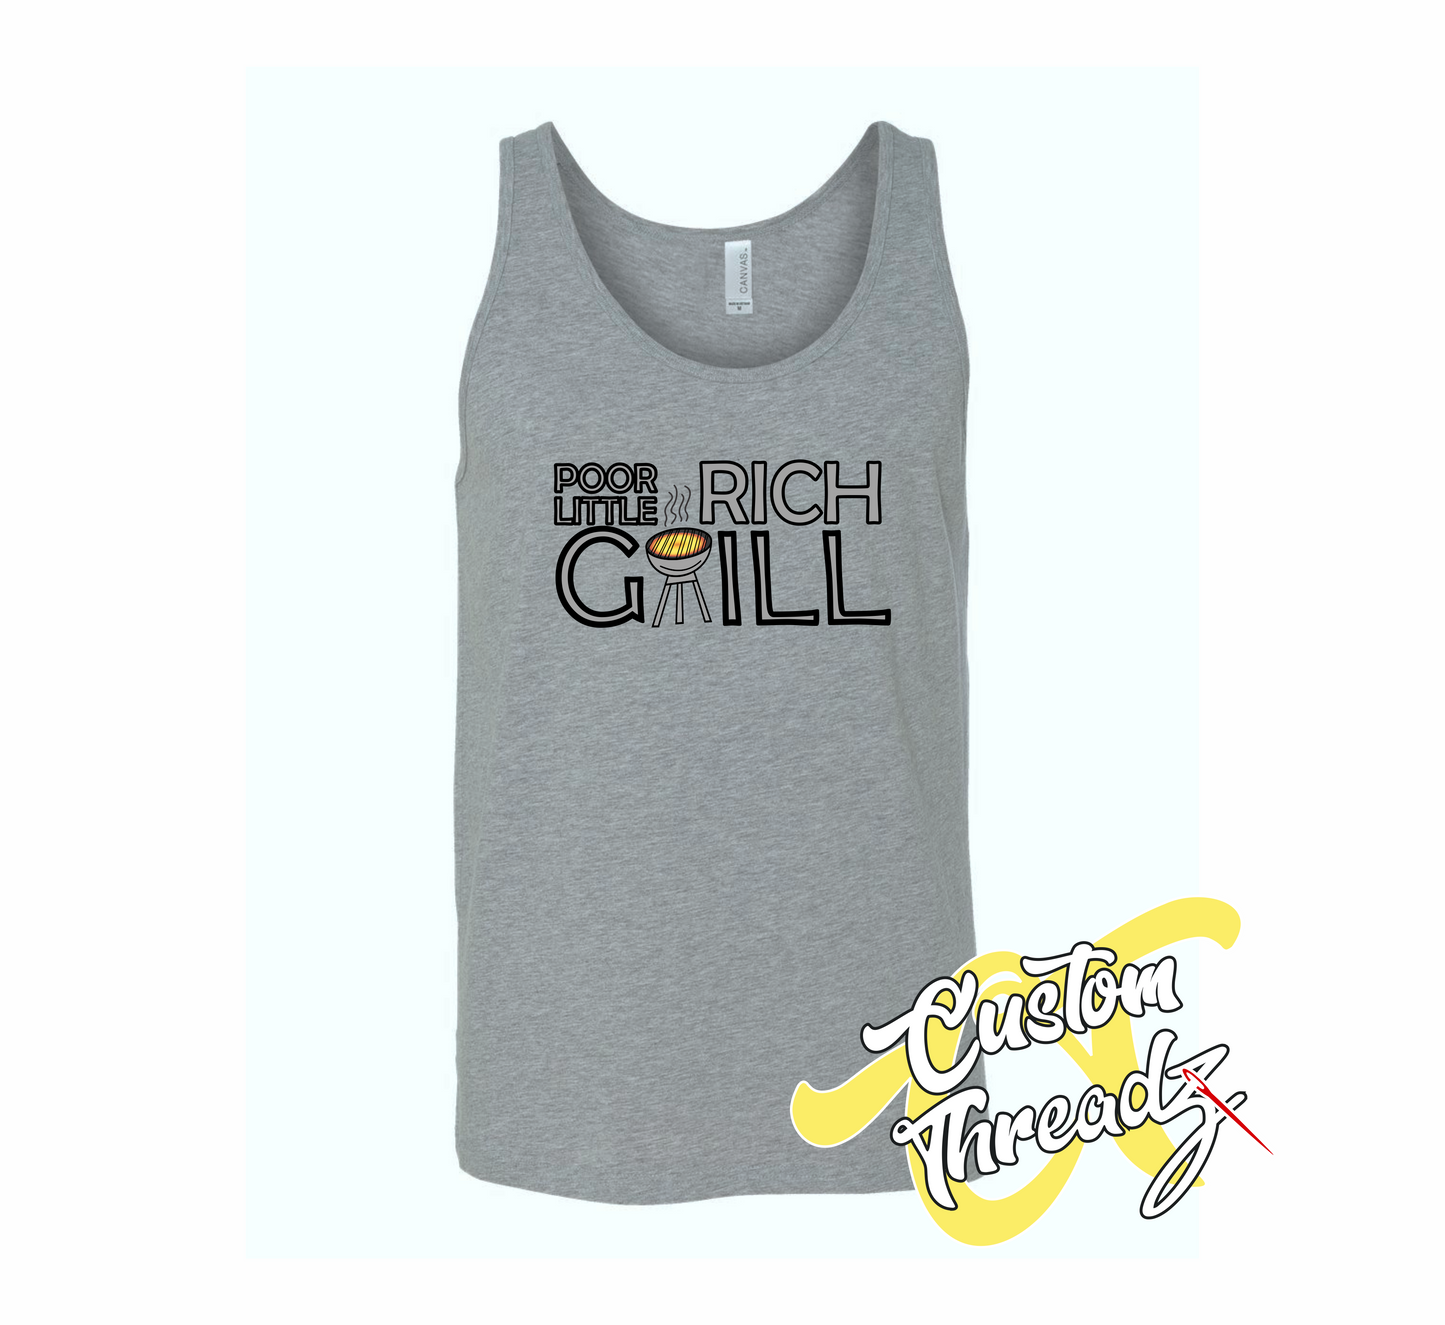 athletic heather grey tank top with poor little rich grill schitts creek DTG printed design